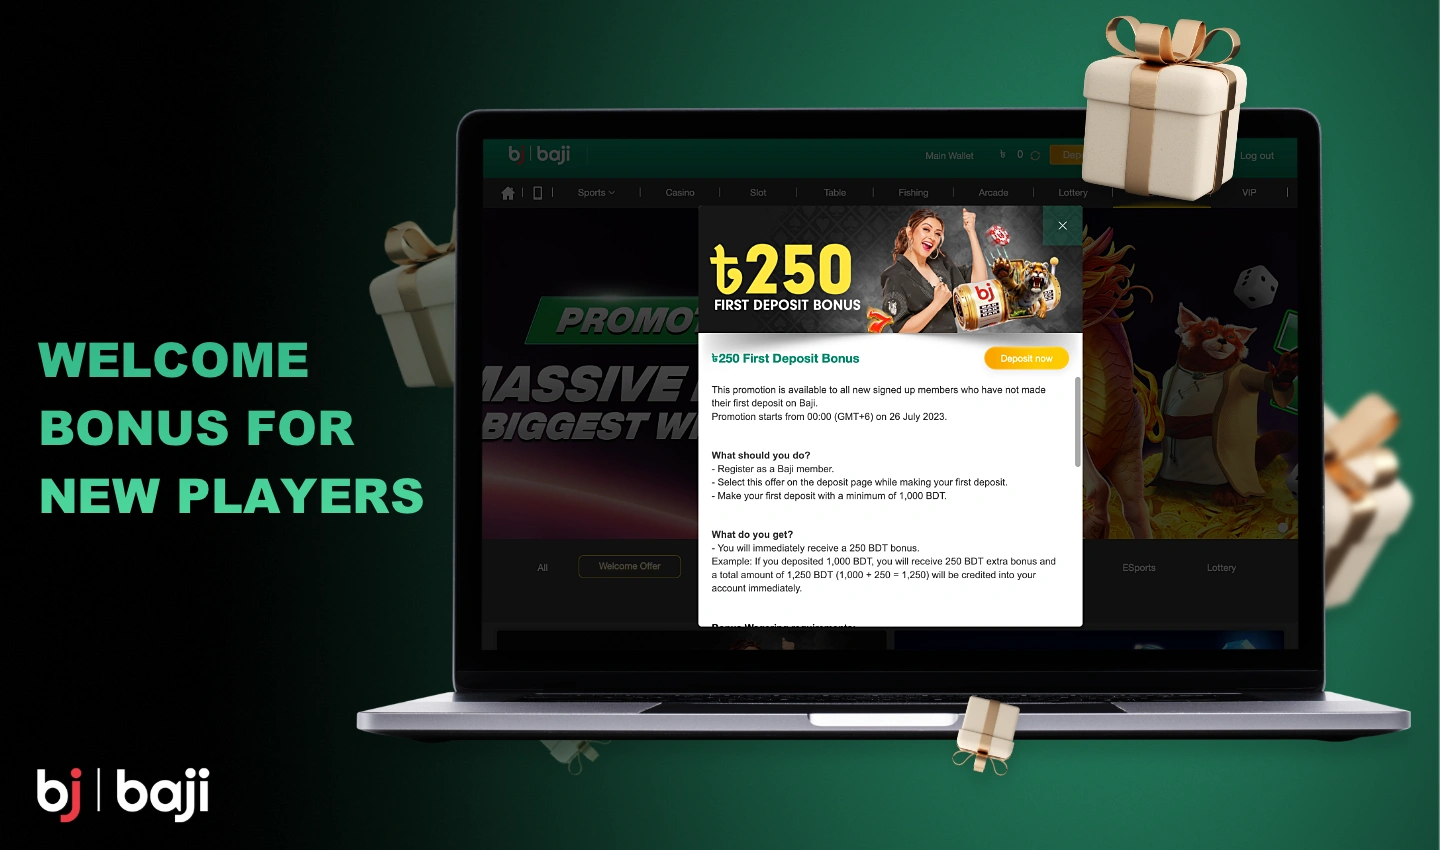 Baji welcome bonus is designed for new users who intend to bet on sports and games